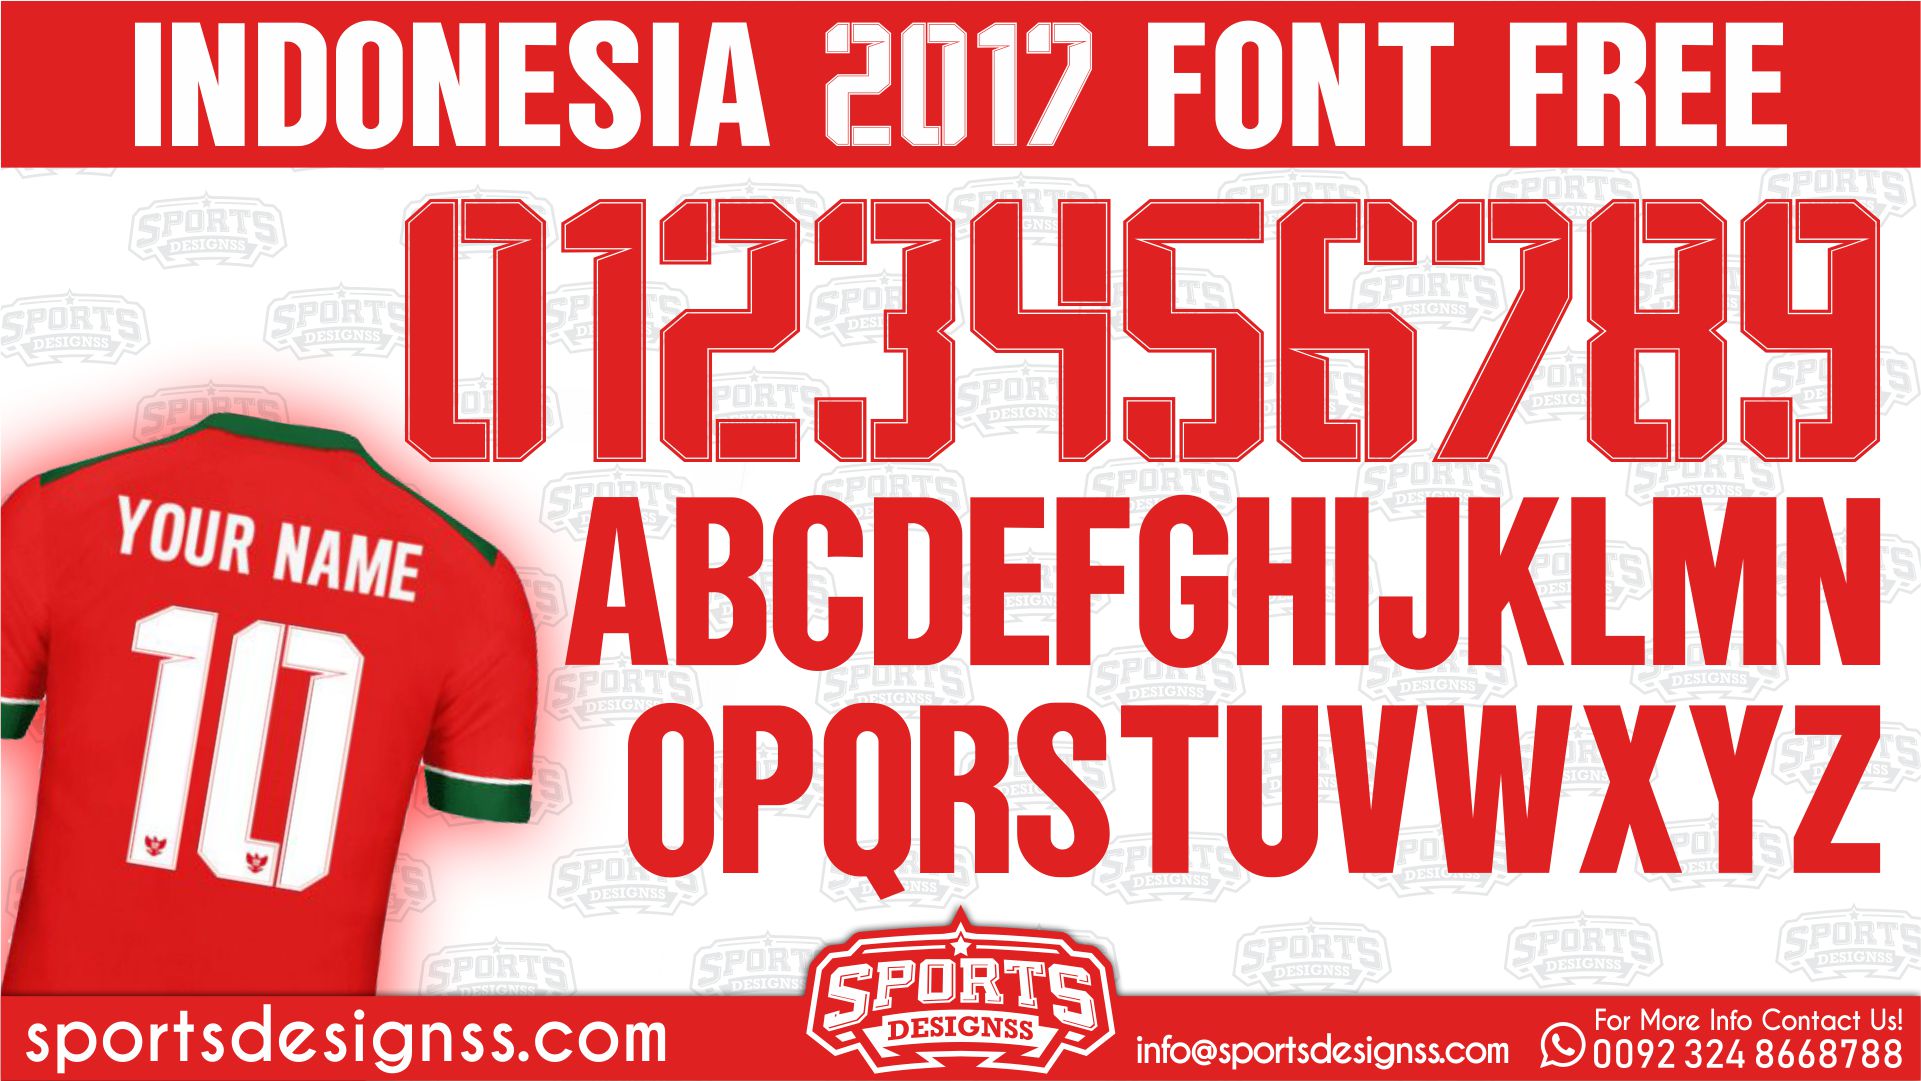 Indonesia Football Font Free Download,FREE DOWNLOAD: Indonesia 2017 Football Font by Sports Designss,FREE DOWNLOAD: Indonesia 2017 Football Font,Indonesia FontFree Download by Sports Designss_Download,Indonesia Font Free Download by Sports Designss Download, Indonesia 2017 Football Font Free Download by Sports Designss,Indonesia 2017 Font Free Download, Indonesia 2017 Font, Indonesia 2017 Font Free Download, Indonesia New Font Free Download, EFL font, FA Font, EFL font Free Download, FA Font Free Download,Indonesia 2017 Free Download,Indonesia 2017 Font, 2017 football fonts free download, freefootballfont, sportsdesignss.com, mqasimali.com, Free Download Indonesia 2017 Font,Indonesia  WorldCup font, Indonesia latest jersey font, Indonesia new jersey font,nfl font,football jersey font ttf free download,free football fonts,premier league font,real madrid font,football kit font,football number font name,la liga jersey font,sublimation football jersey design,adidas font,PERSIB 2017 FONT Indonesia 2017 Football Font Free Download,Indonesia 2017 Font,Indonesia New Font Free Download,Indonesia font,Indonesia font Free Download,Indonesia 2017 font Free Download,freefootballfont,sportsdesignss.com,mqasimali.com,Free Download Indonesia 2017 Font,Indonesia font,Indonesia latest jersey font,Indonesia new jersey font,Indonesia 2017 jersey font,Download Indonesia 2017 Font Free,Download Indonesia 2017 Font FREE,Indonesia 2017 typeface,Download Indonesia 2017 Football Font For free,Indonesia kit font download,new Indonesia font,Indonesia 2017 FONT (OTF),Indonesia font free download,Indonesia font 2017 free download,Indonesia fc font,nike football font free download,england football font free download,psg font 2017 free download,Saudi Pro League, AFC Champions League, King